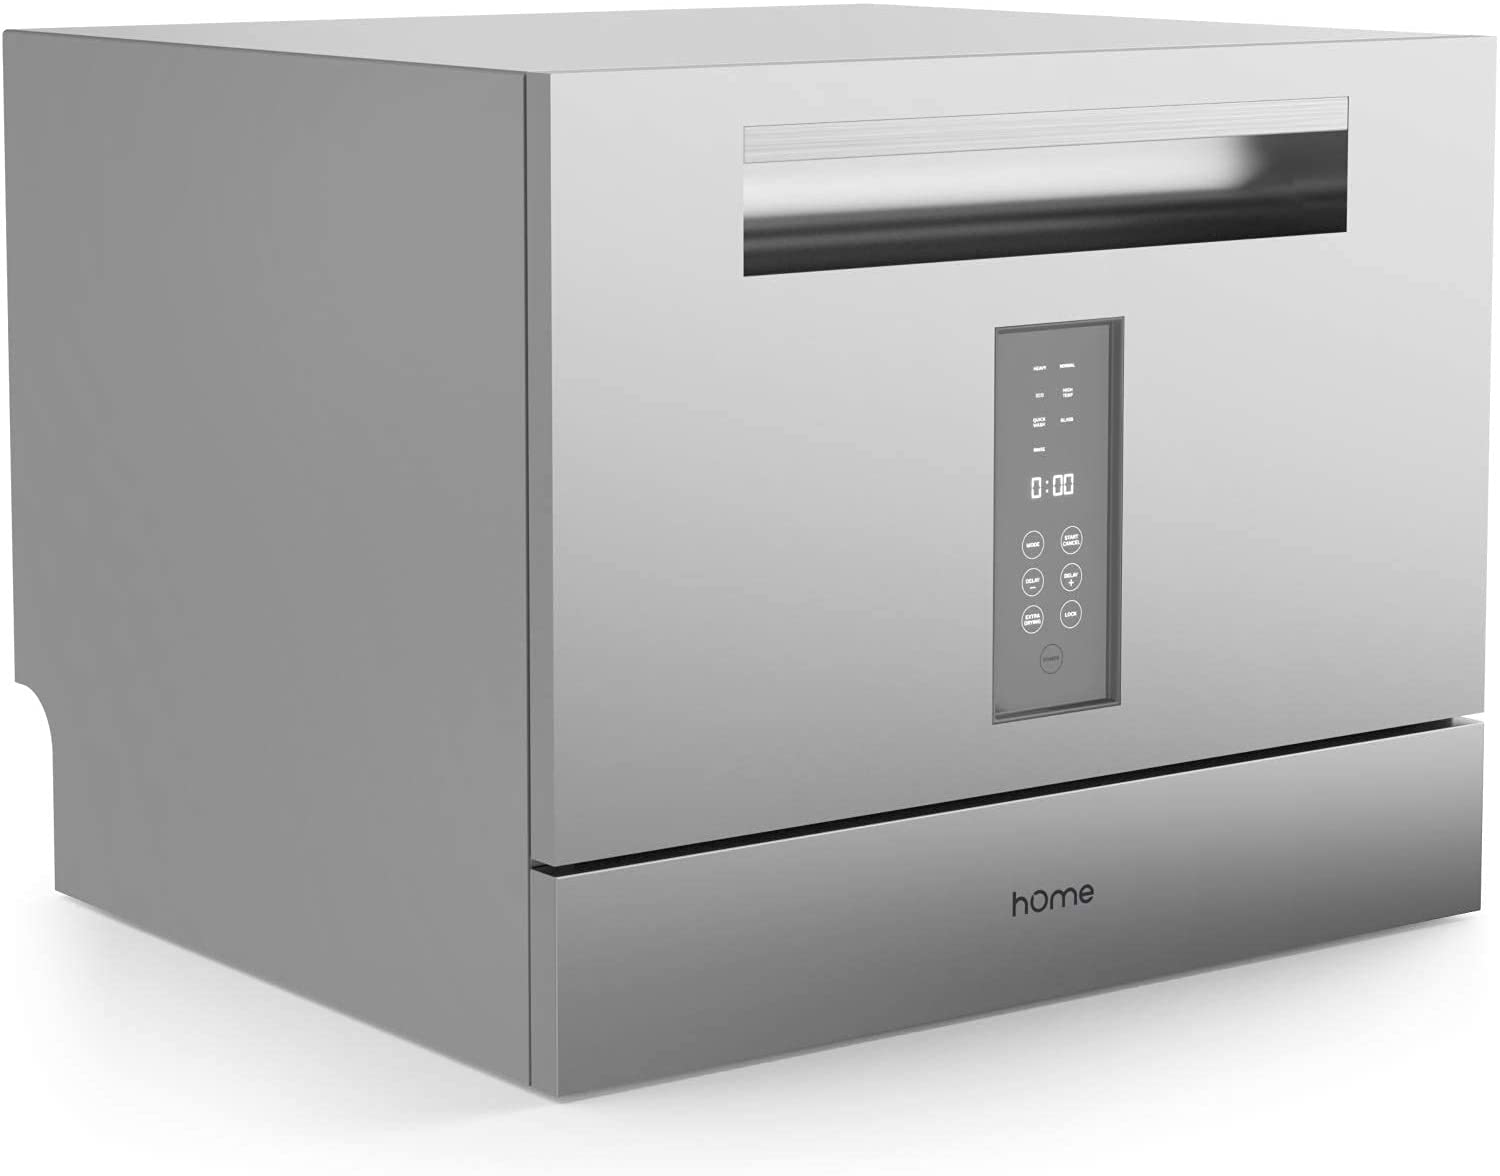 HomeLabs Digital Countertop Dishwasher with 6 Place Settings